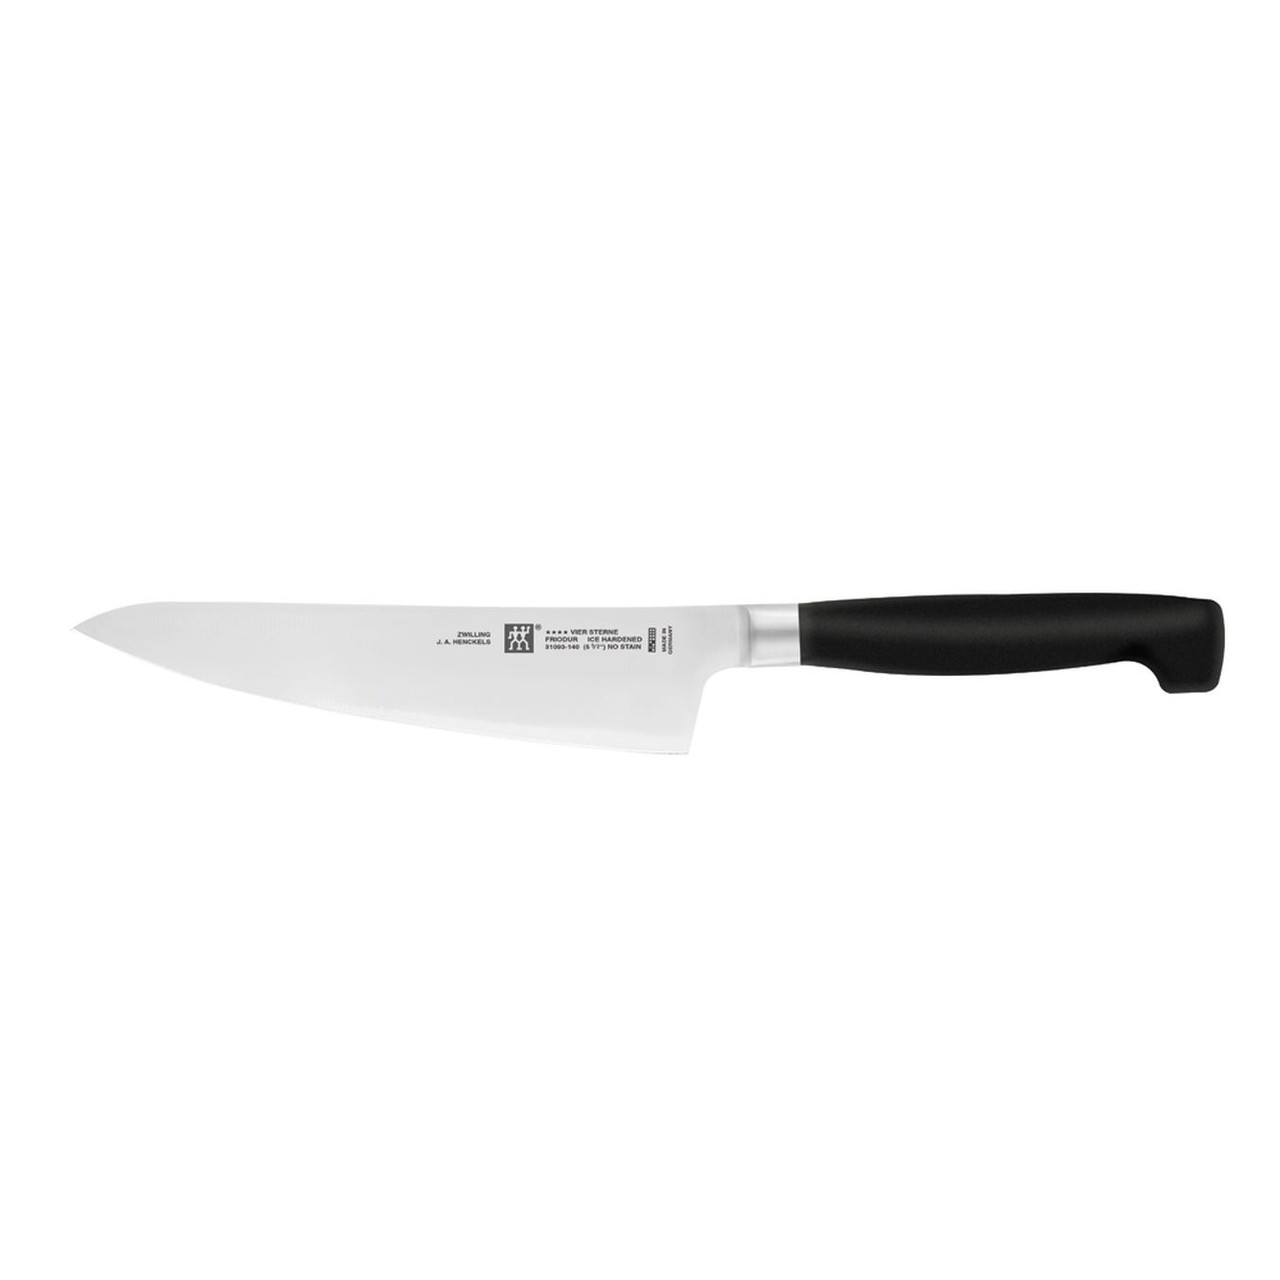 https://cdn11.bigcommerce.com/s-hccytny0od/images/stencil/1280x1280/products/2648/9361/zwilling-ja-henckels-four-star-prep-knife__85020.1564442135.jpg?c=2?imbypass=on